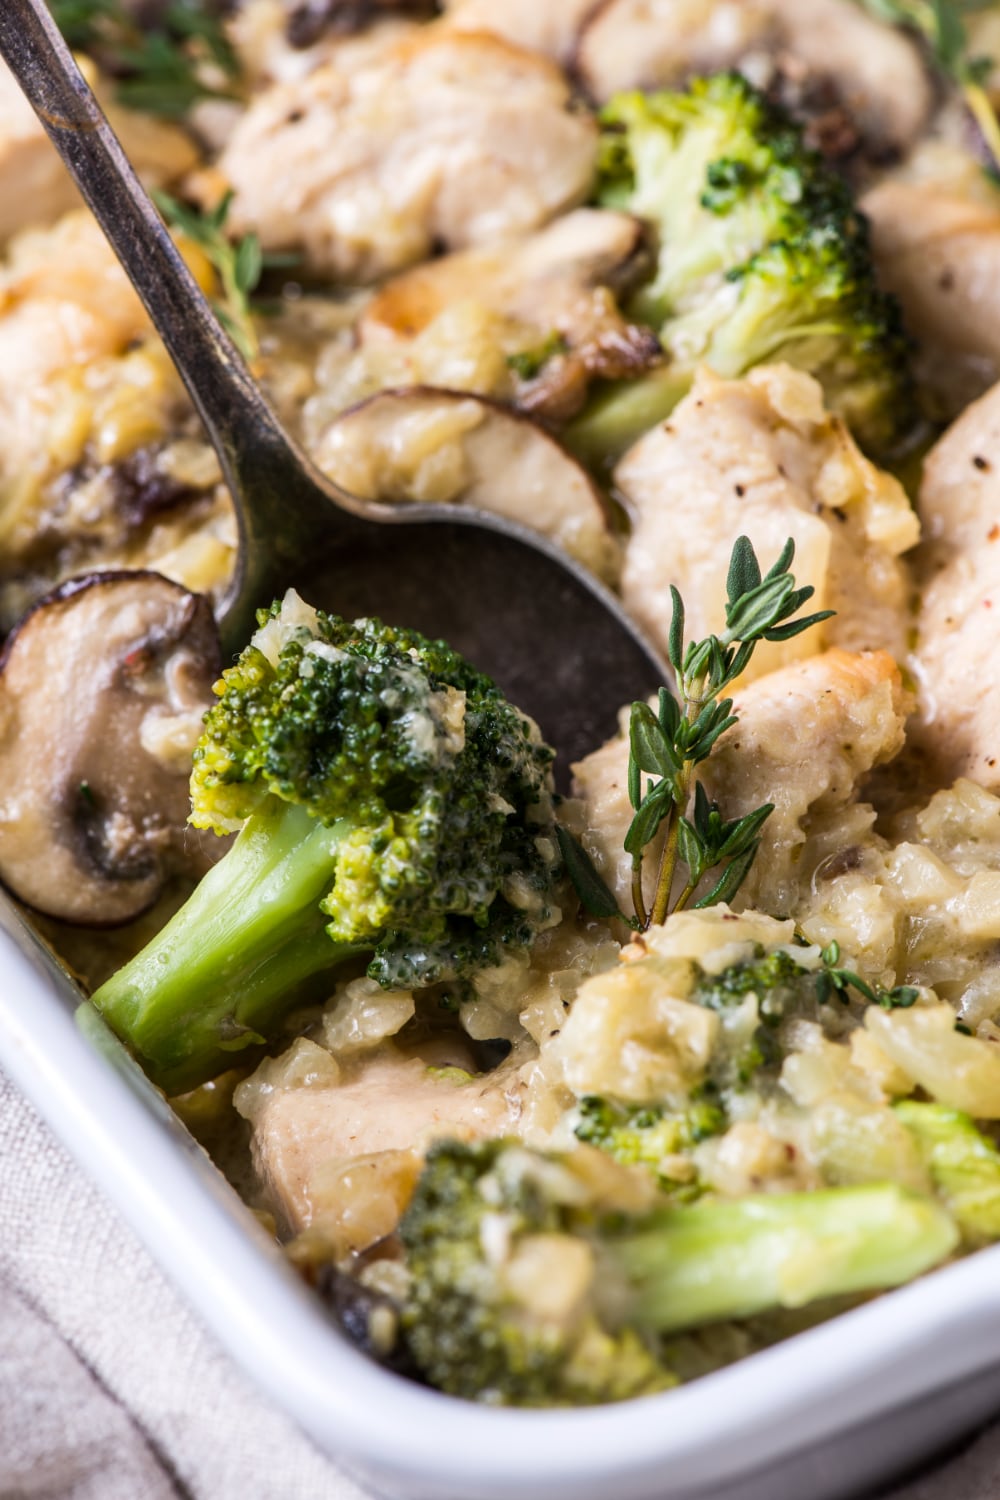 A spoon scooping out chicken and broccoli from the casserole dish.